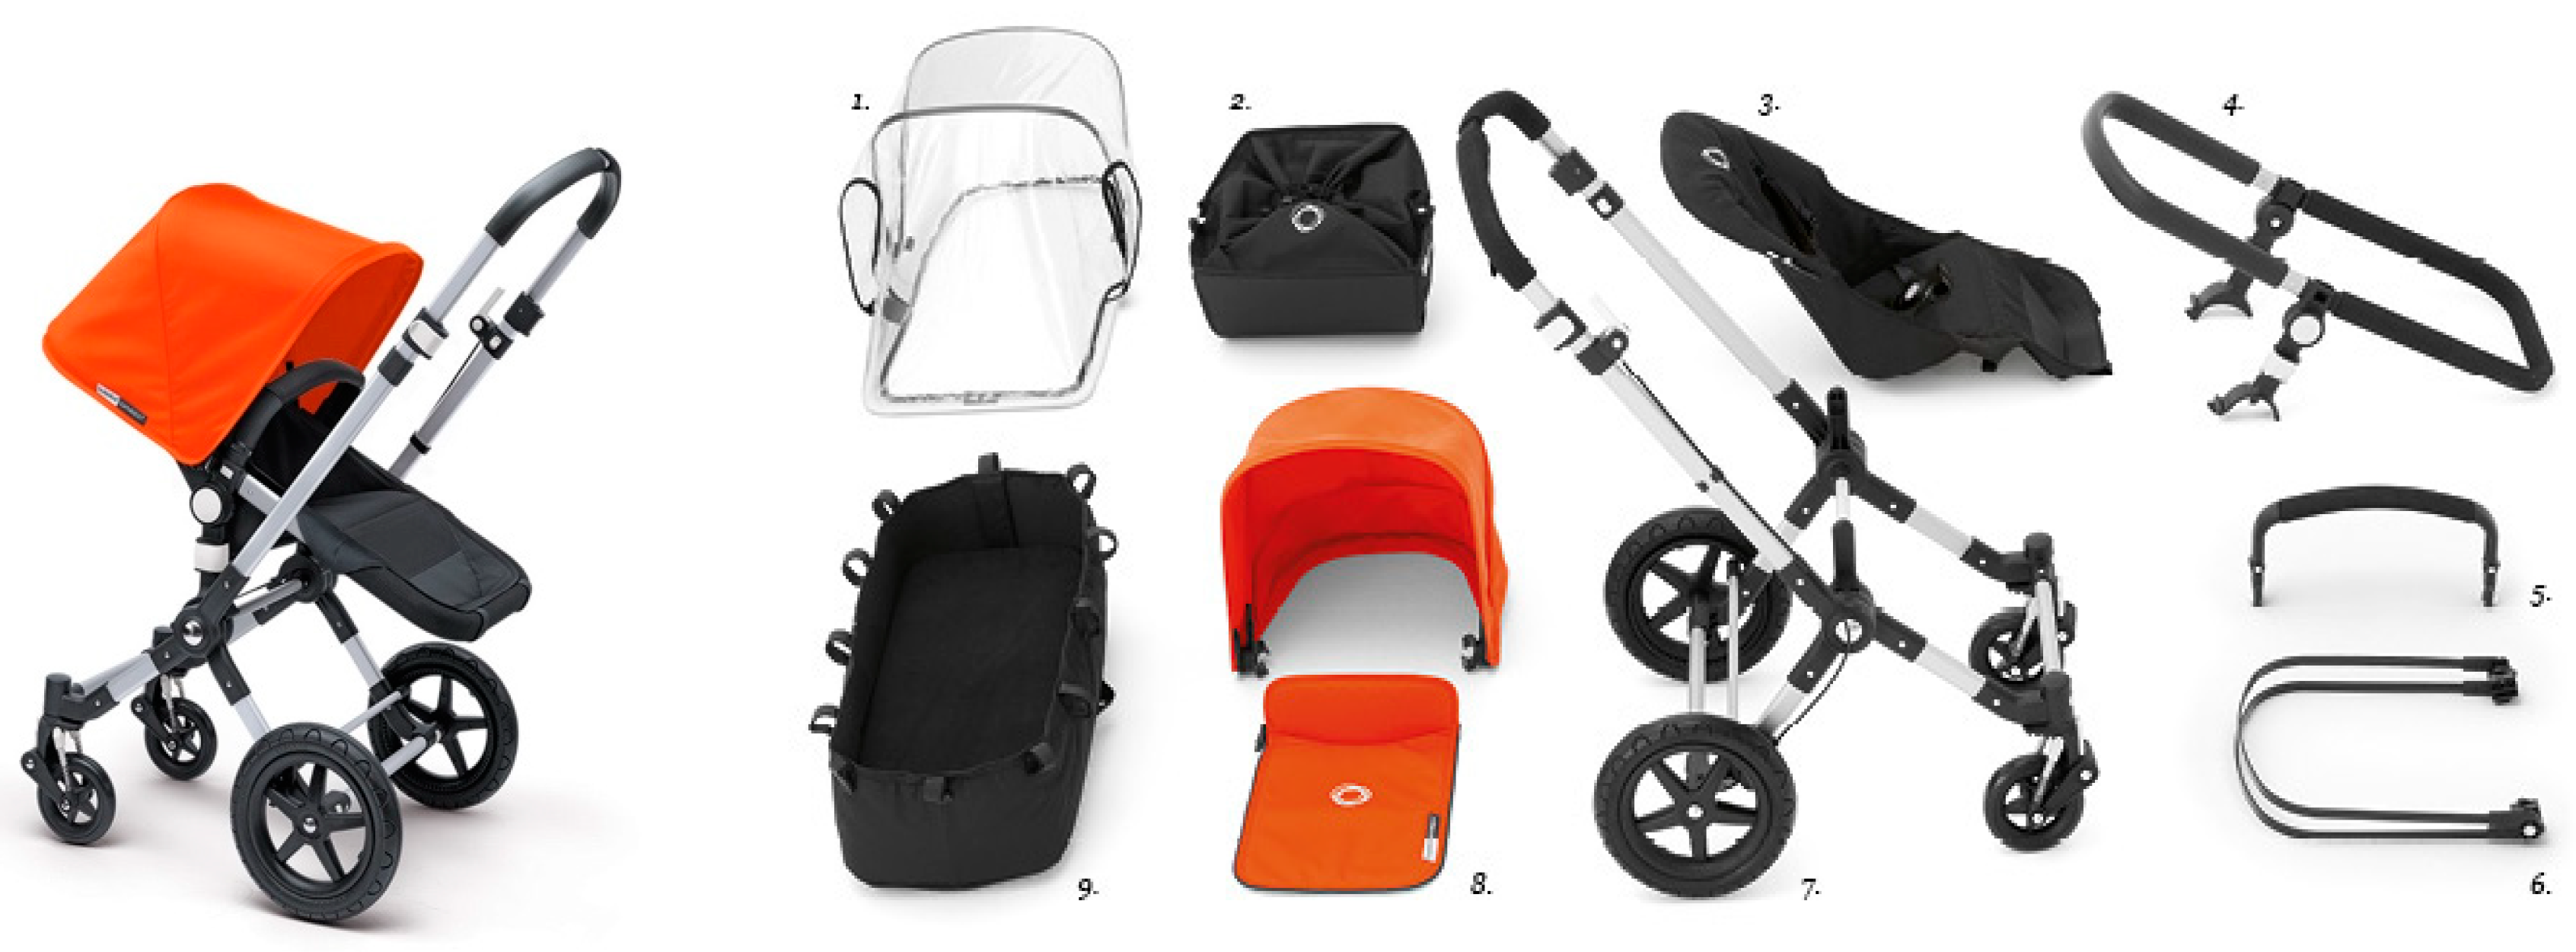 Strollers & Accessories Business:BusinessHAB.com